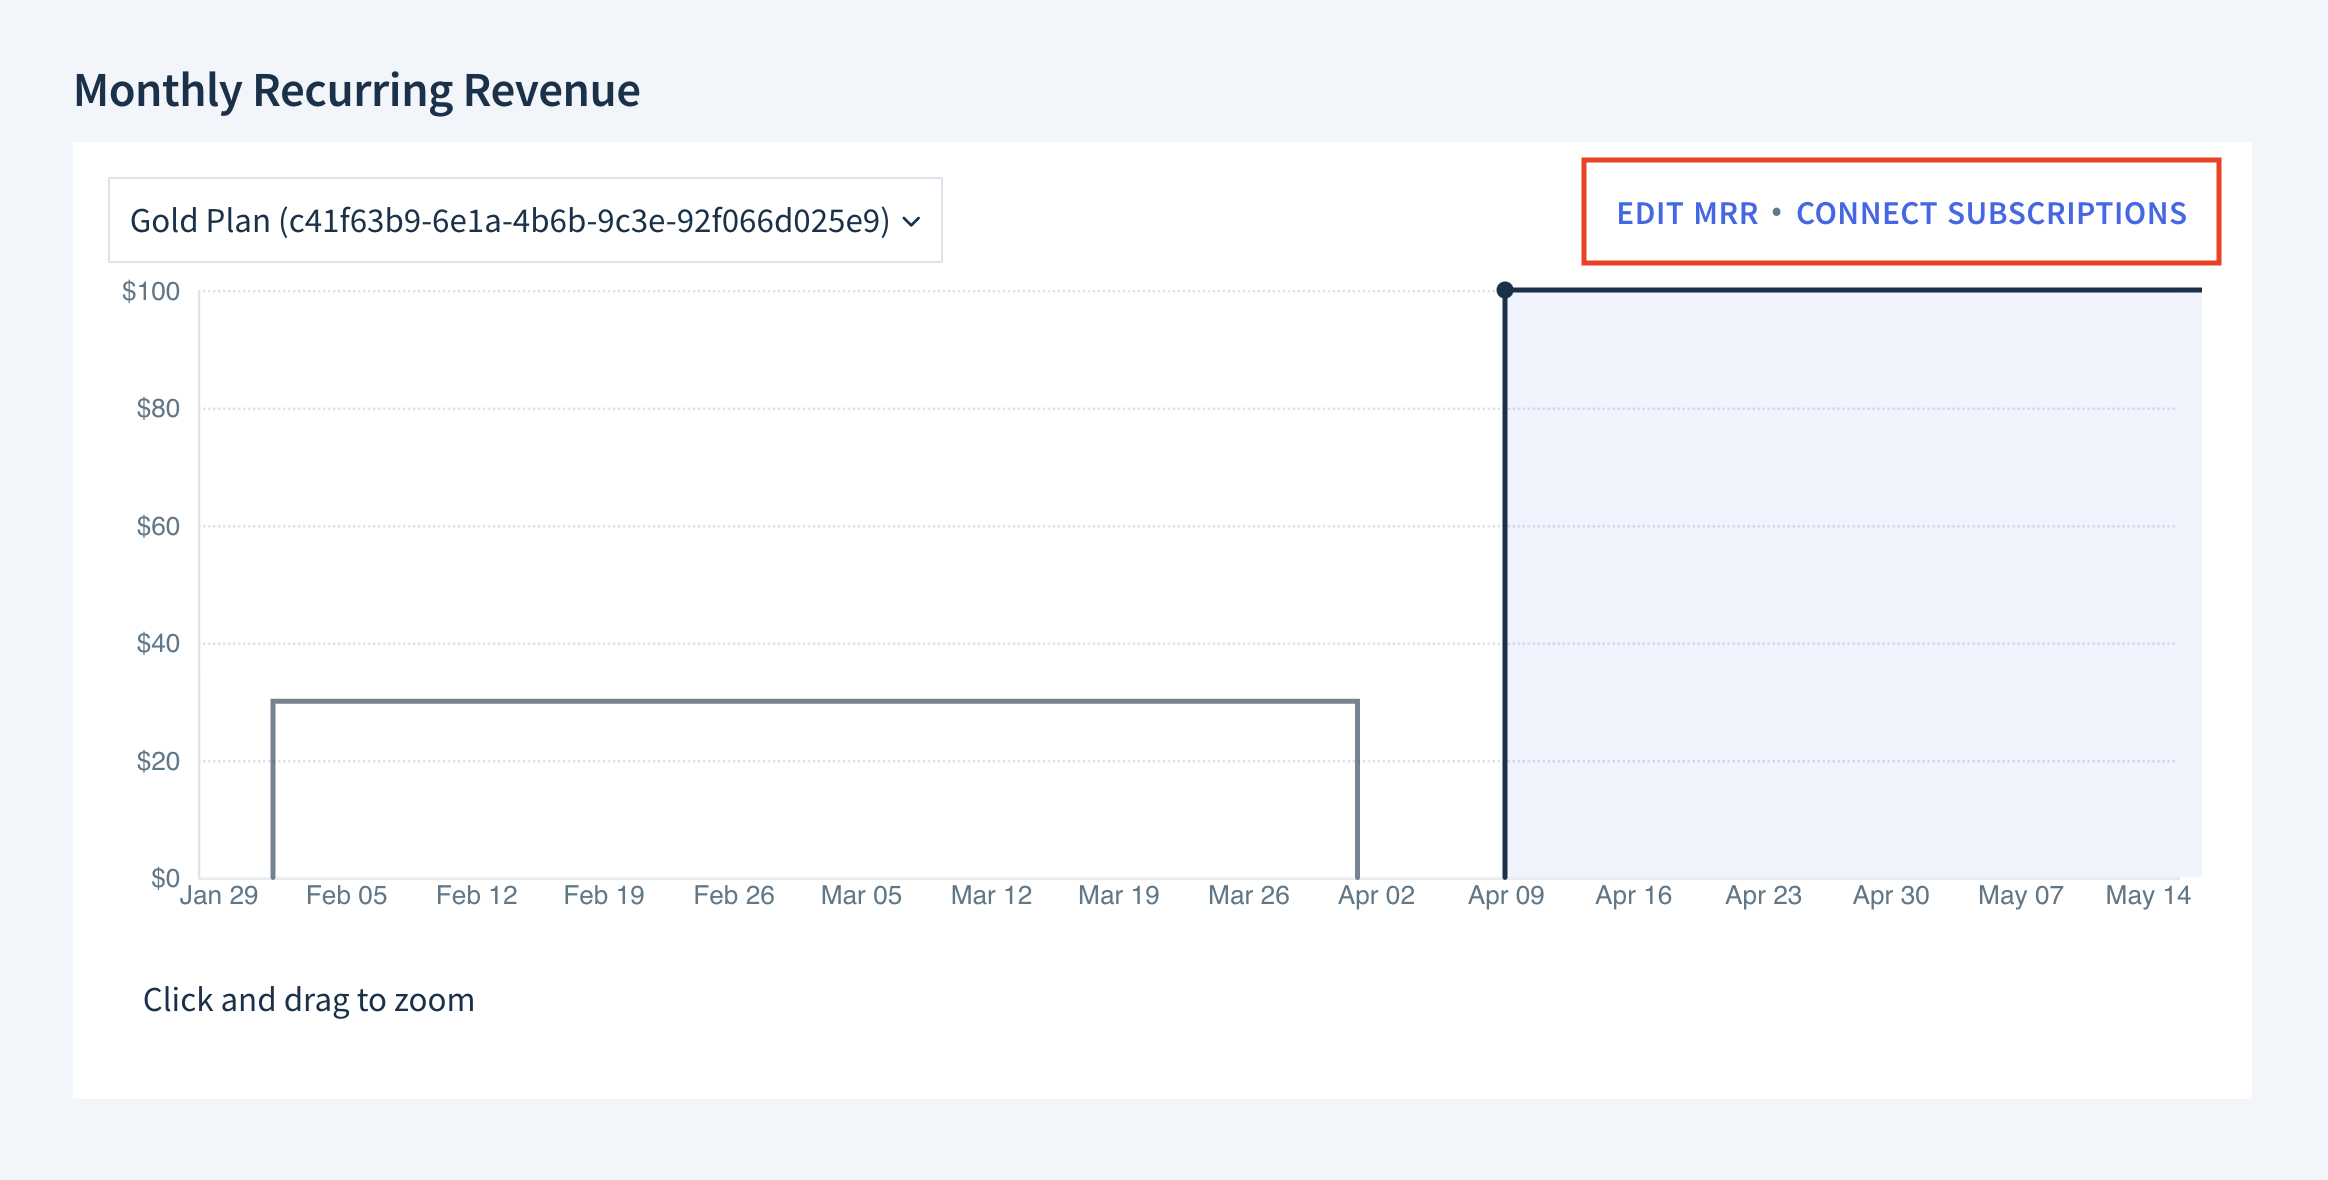 Screenshot of the Monthly Recurring Revenue graph. There are two links above the graph: Edit MRR and Connect Subscriptions.